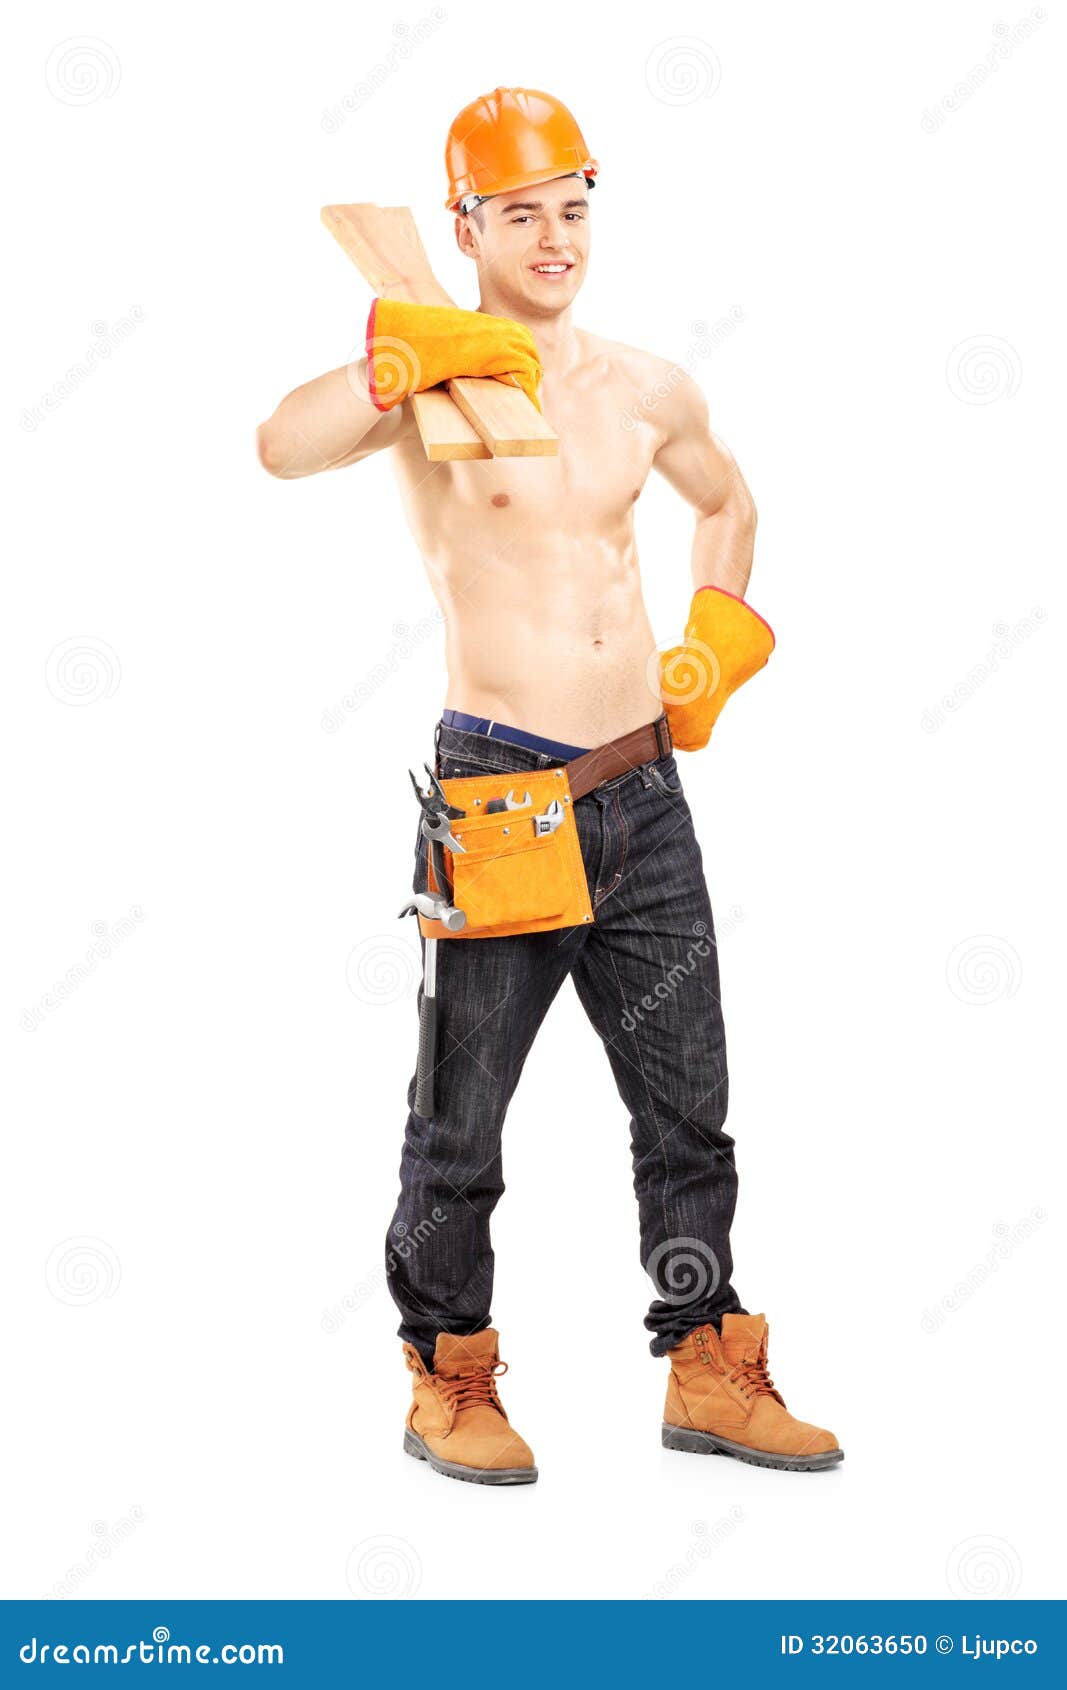 156 Shirtless Muscular Male Construction Worker Stock Photos - Free &  Royalty-Free Stock Photos from Dreamstime